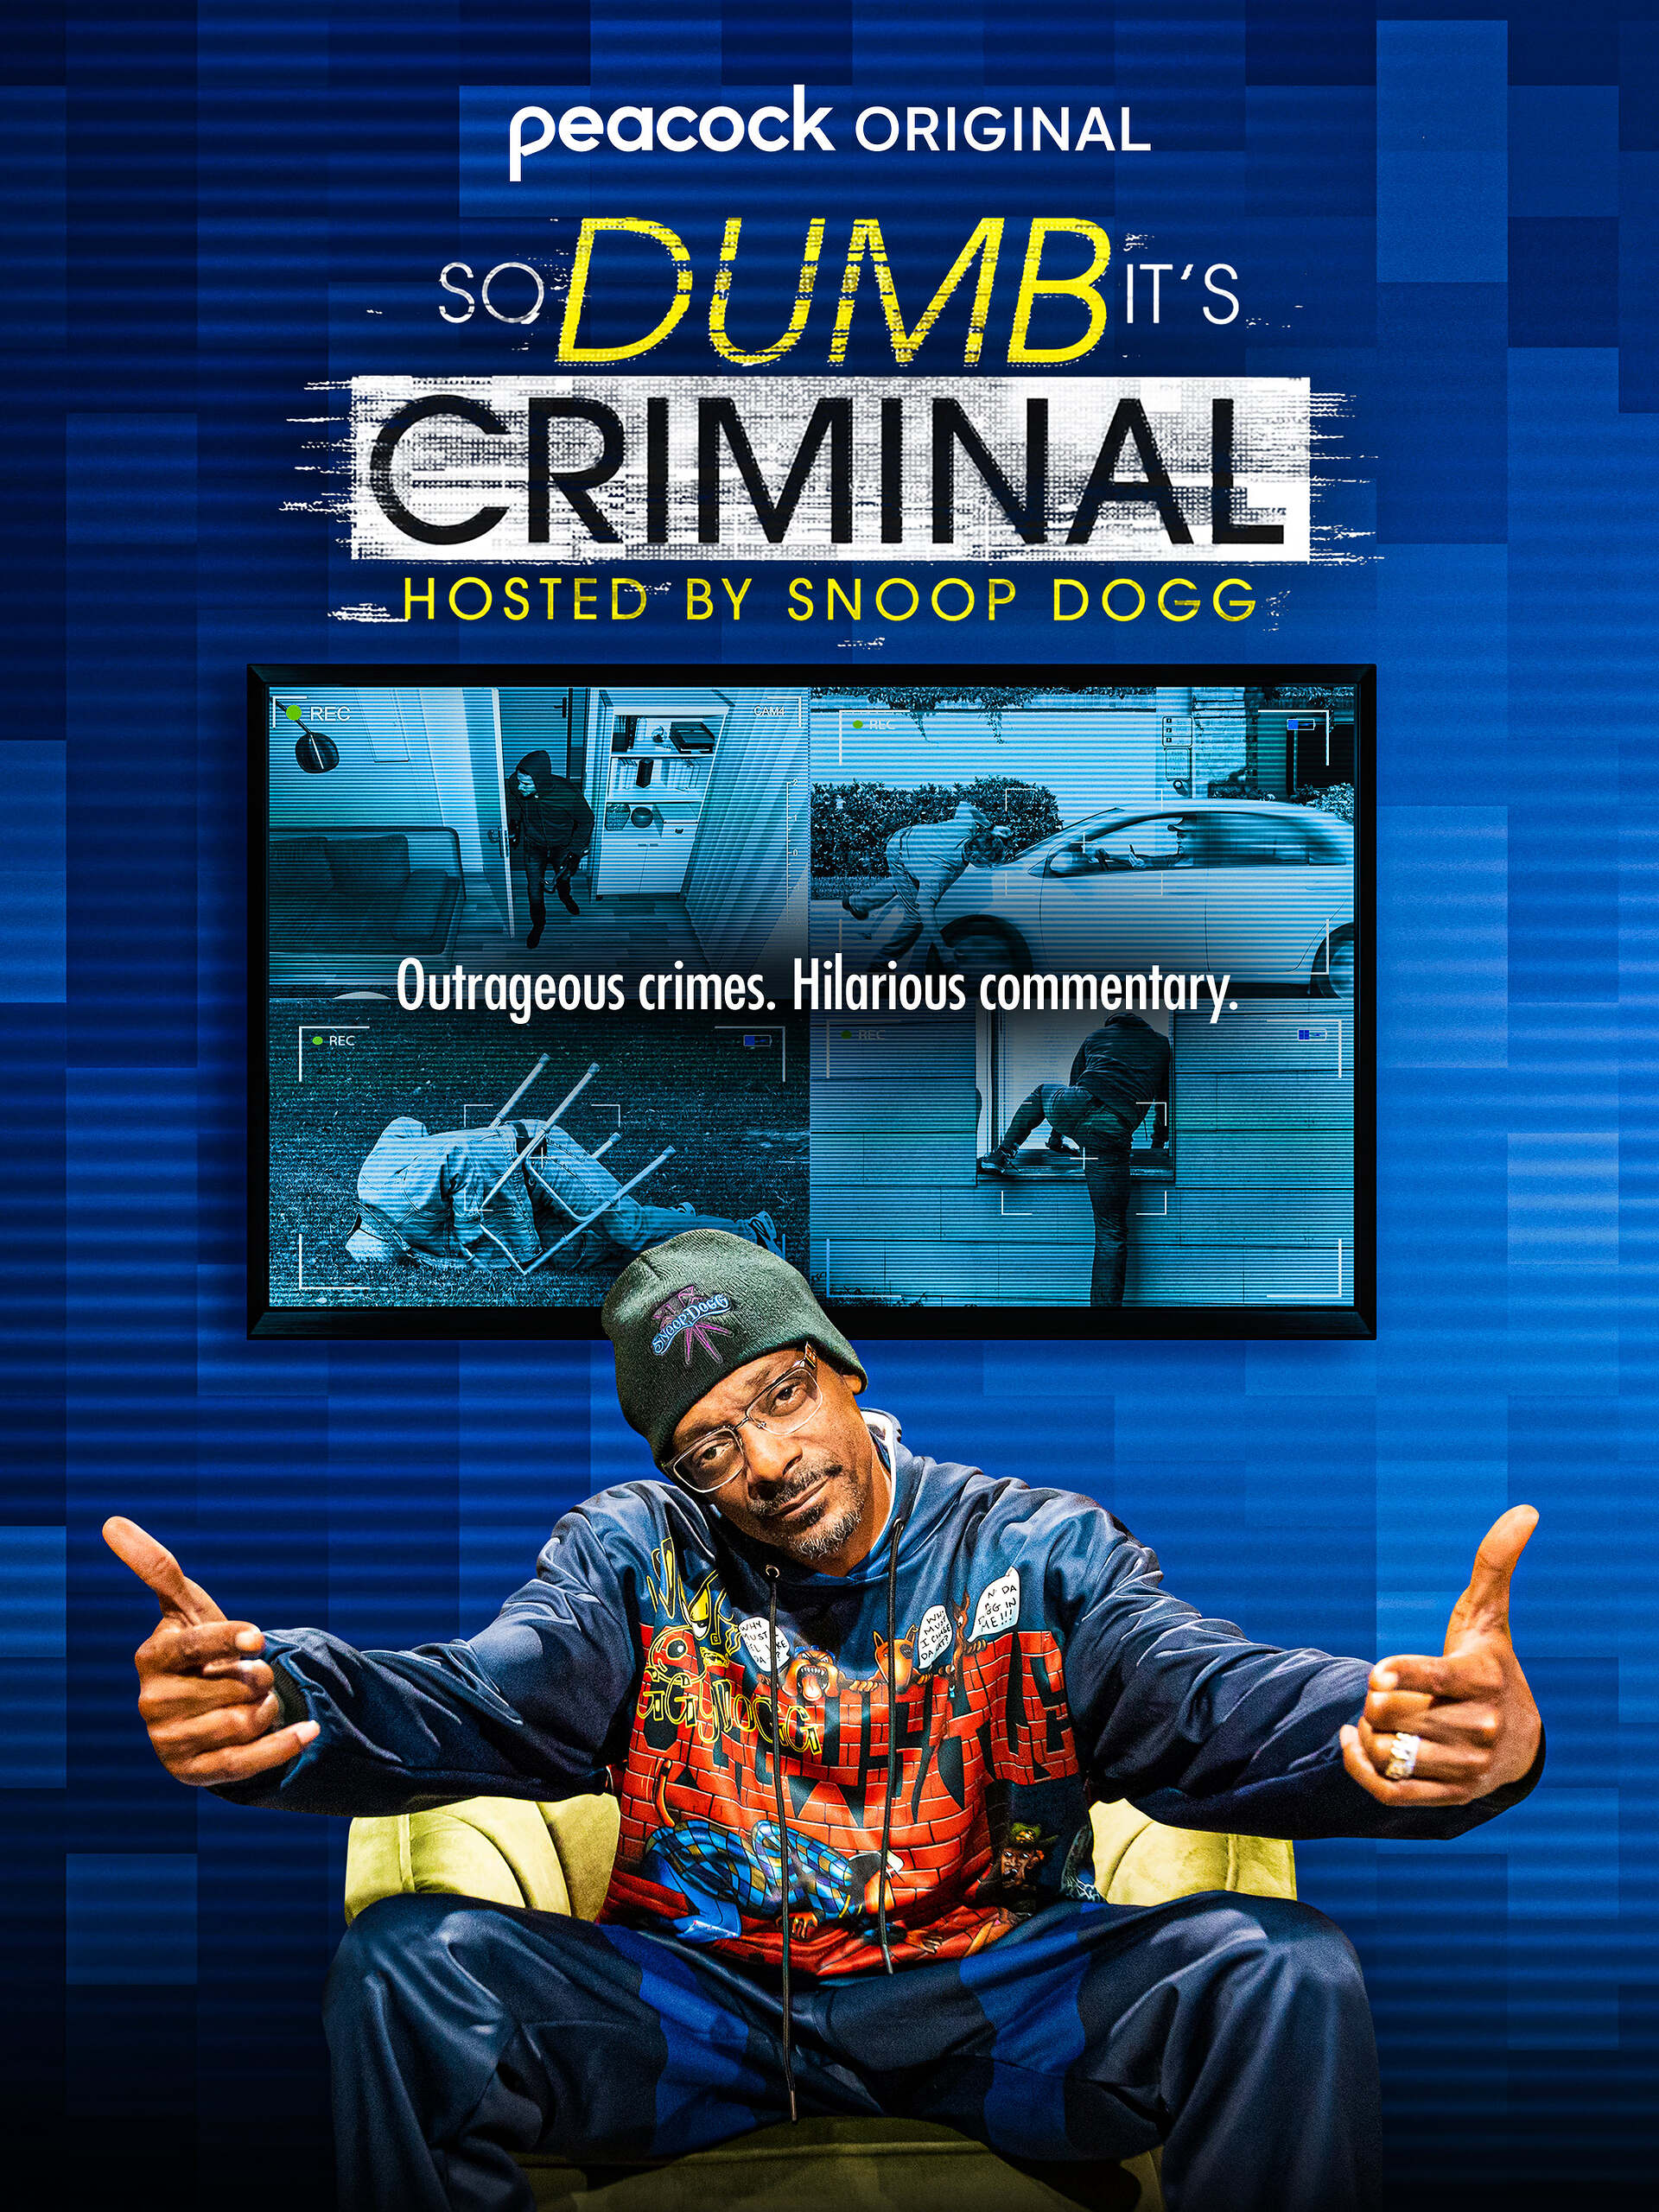 1st Trailer For Peacock Original Series 'So Dumb It's Criminal Hosted By Snoop Dogg'